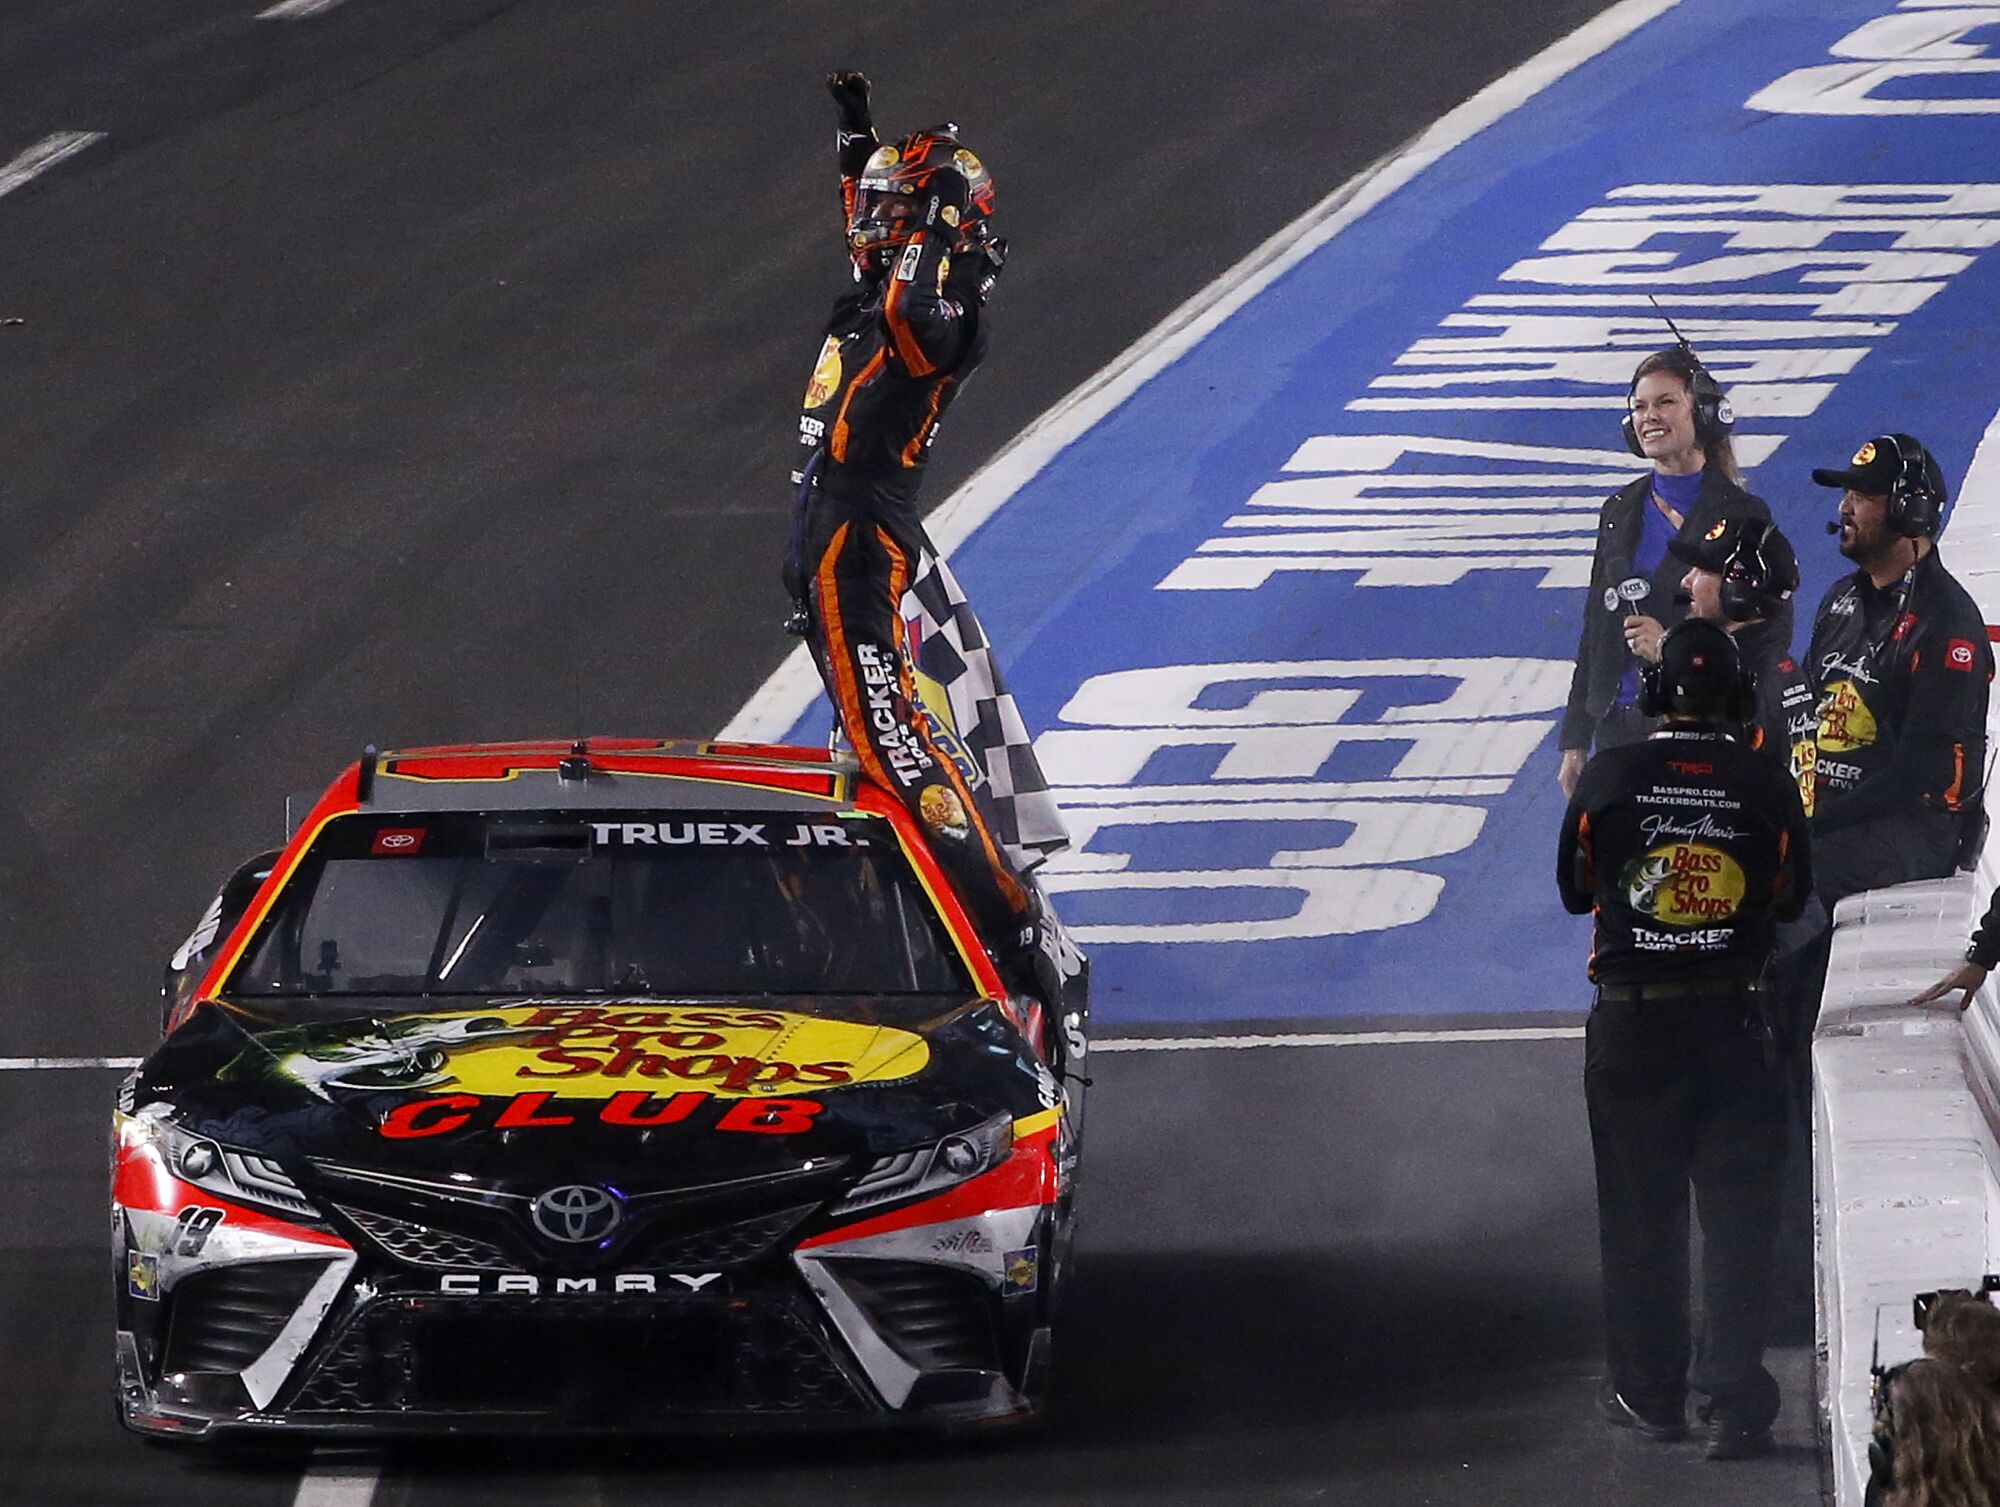 NASCAR driver Martin Truex Jr. stands on his car and raises his arms in triumph after winning the Clash at the Coliseum.